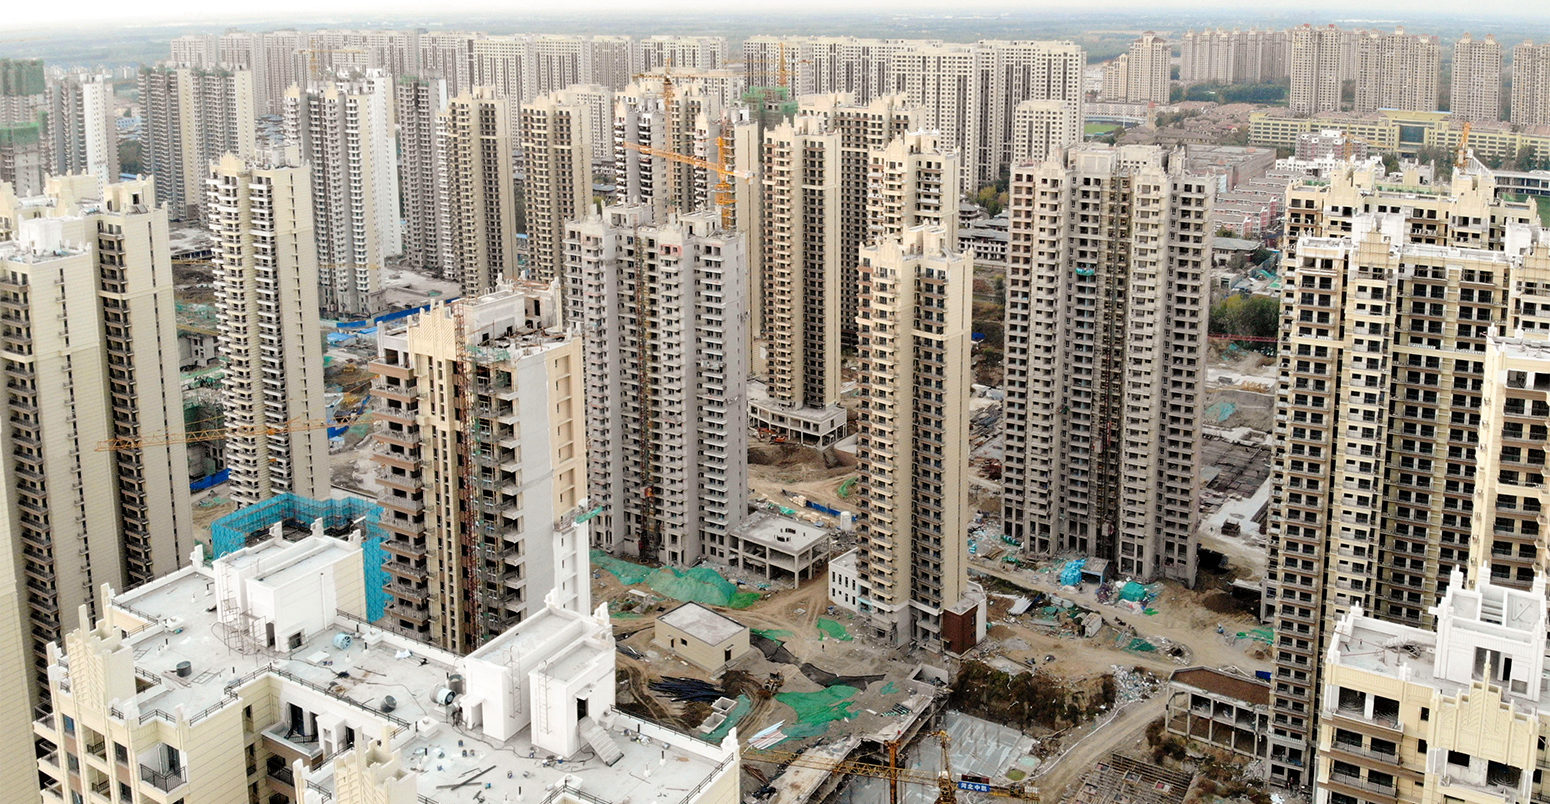 Aerial view of residential buildings under construction in Tianjin, China. Credit: Bonandbon / Alamy Stock Photo. 2A7D9WK